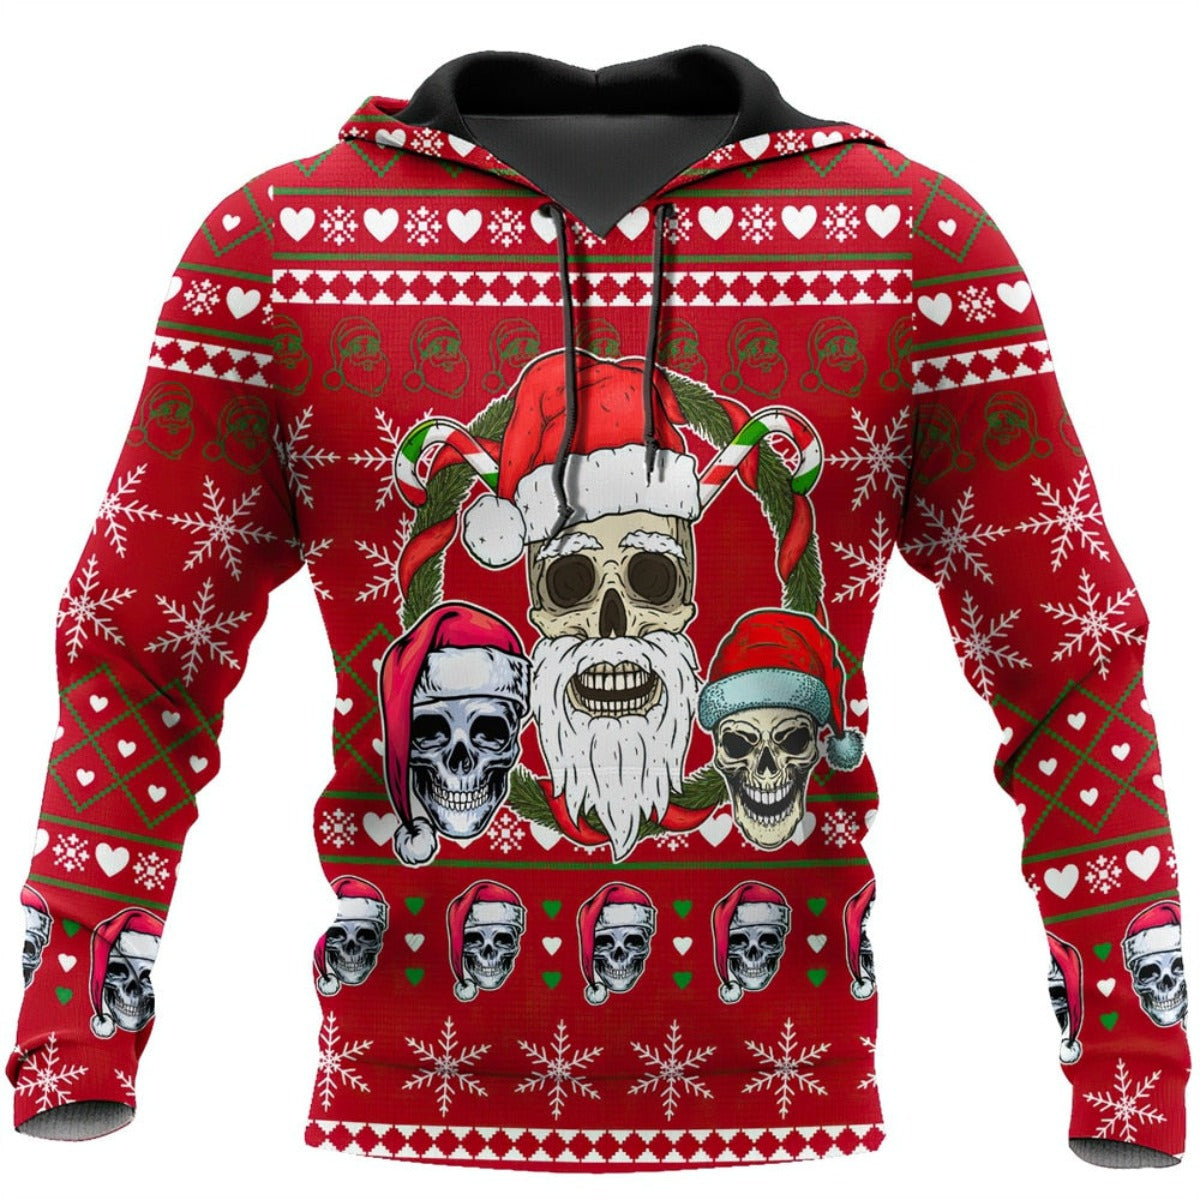 A Santa Skull Ugly Hoodie Christmas Sweater with skulls and geometric skull pattern on it.